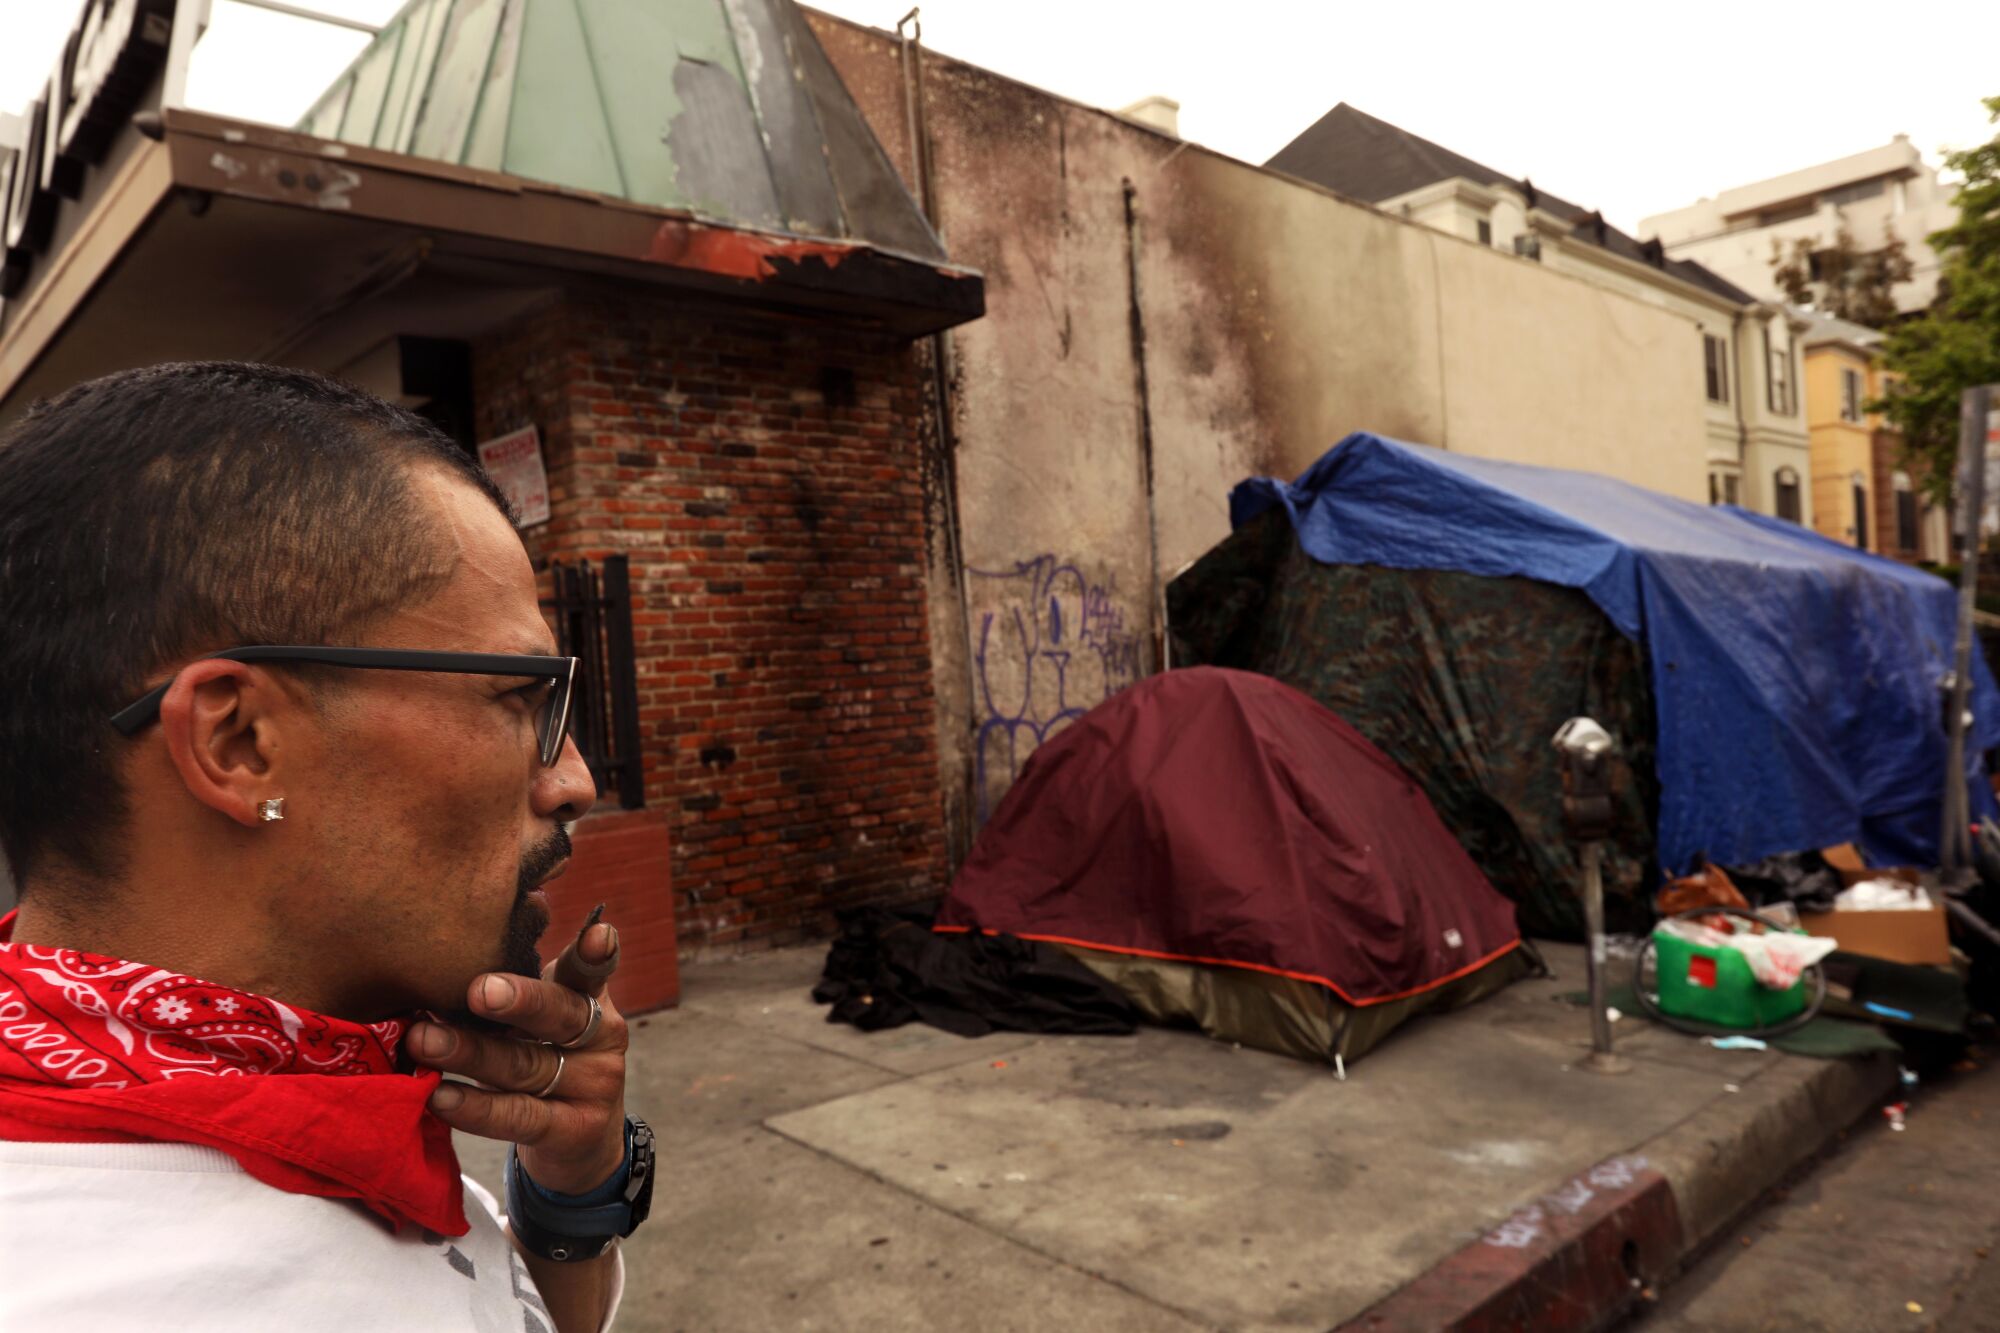 A man stands next to tents on the side of a building